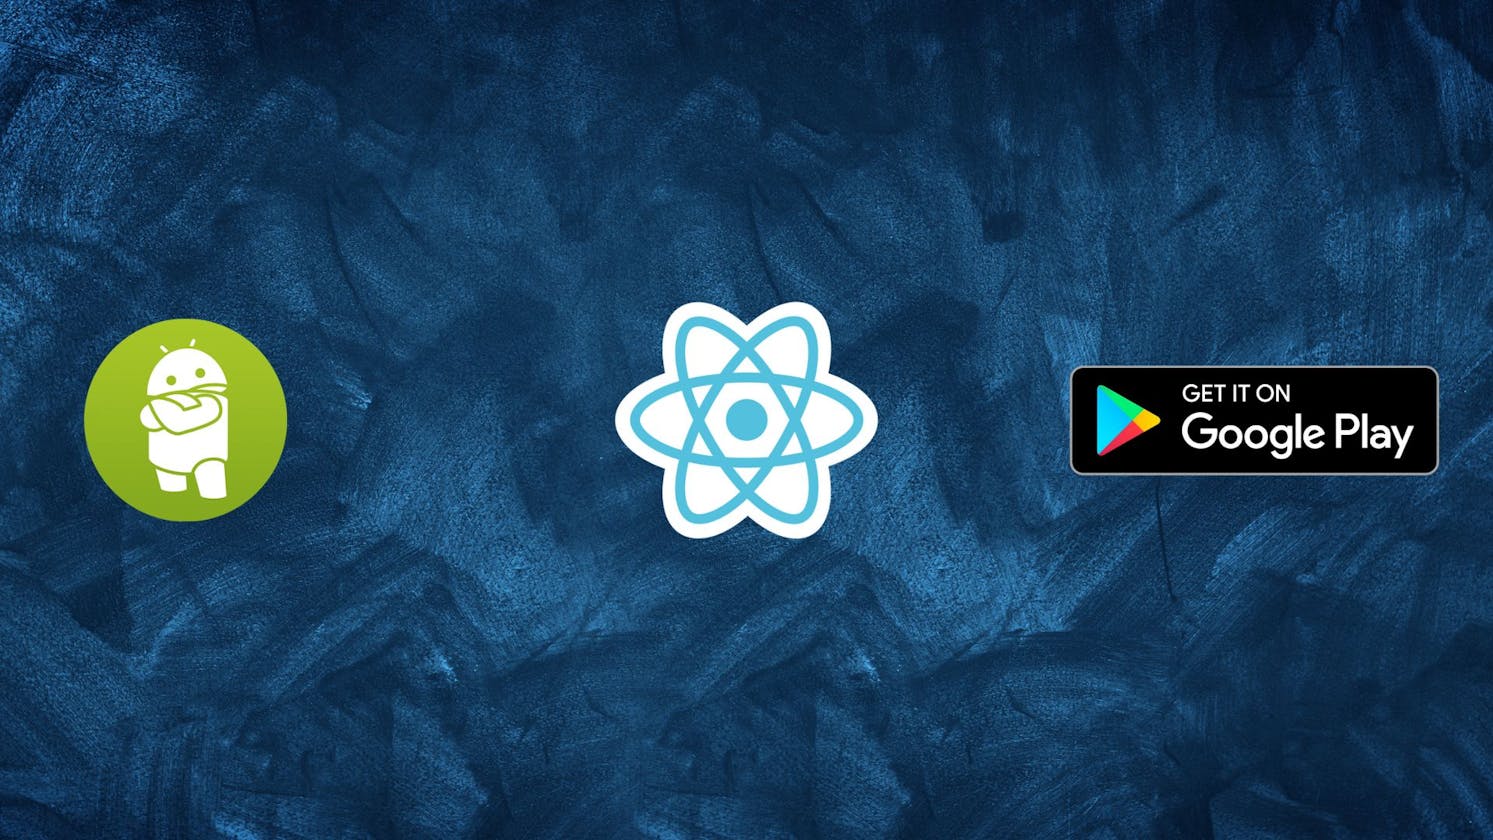 Convert your Existing React js App to Android App Using the Ionic Capacitor